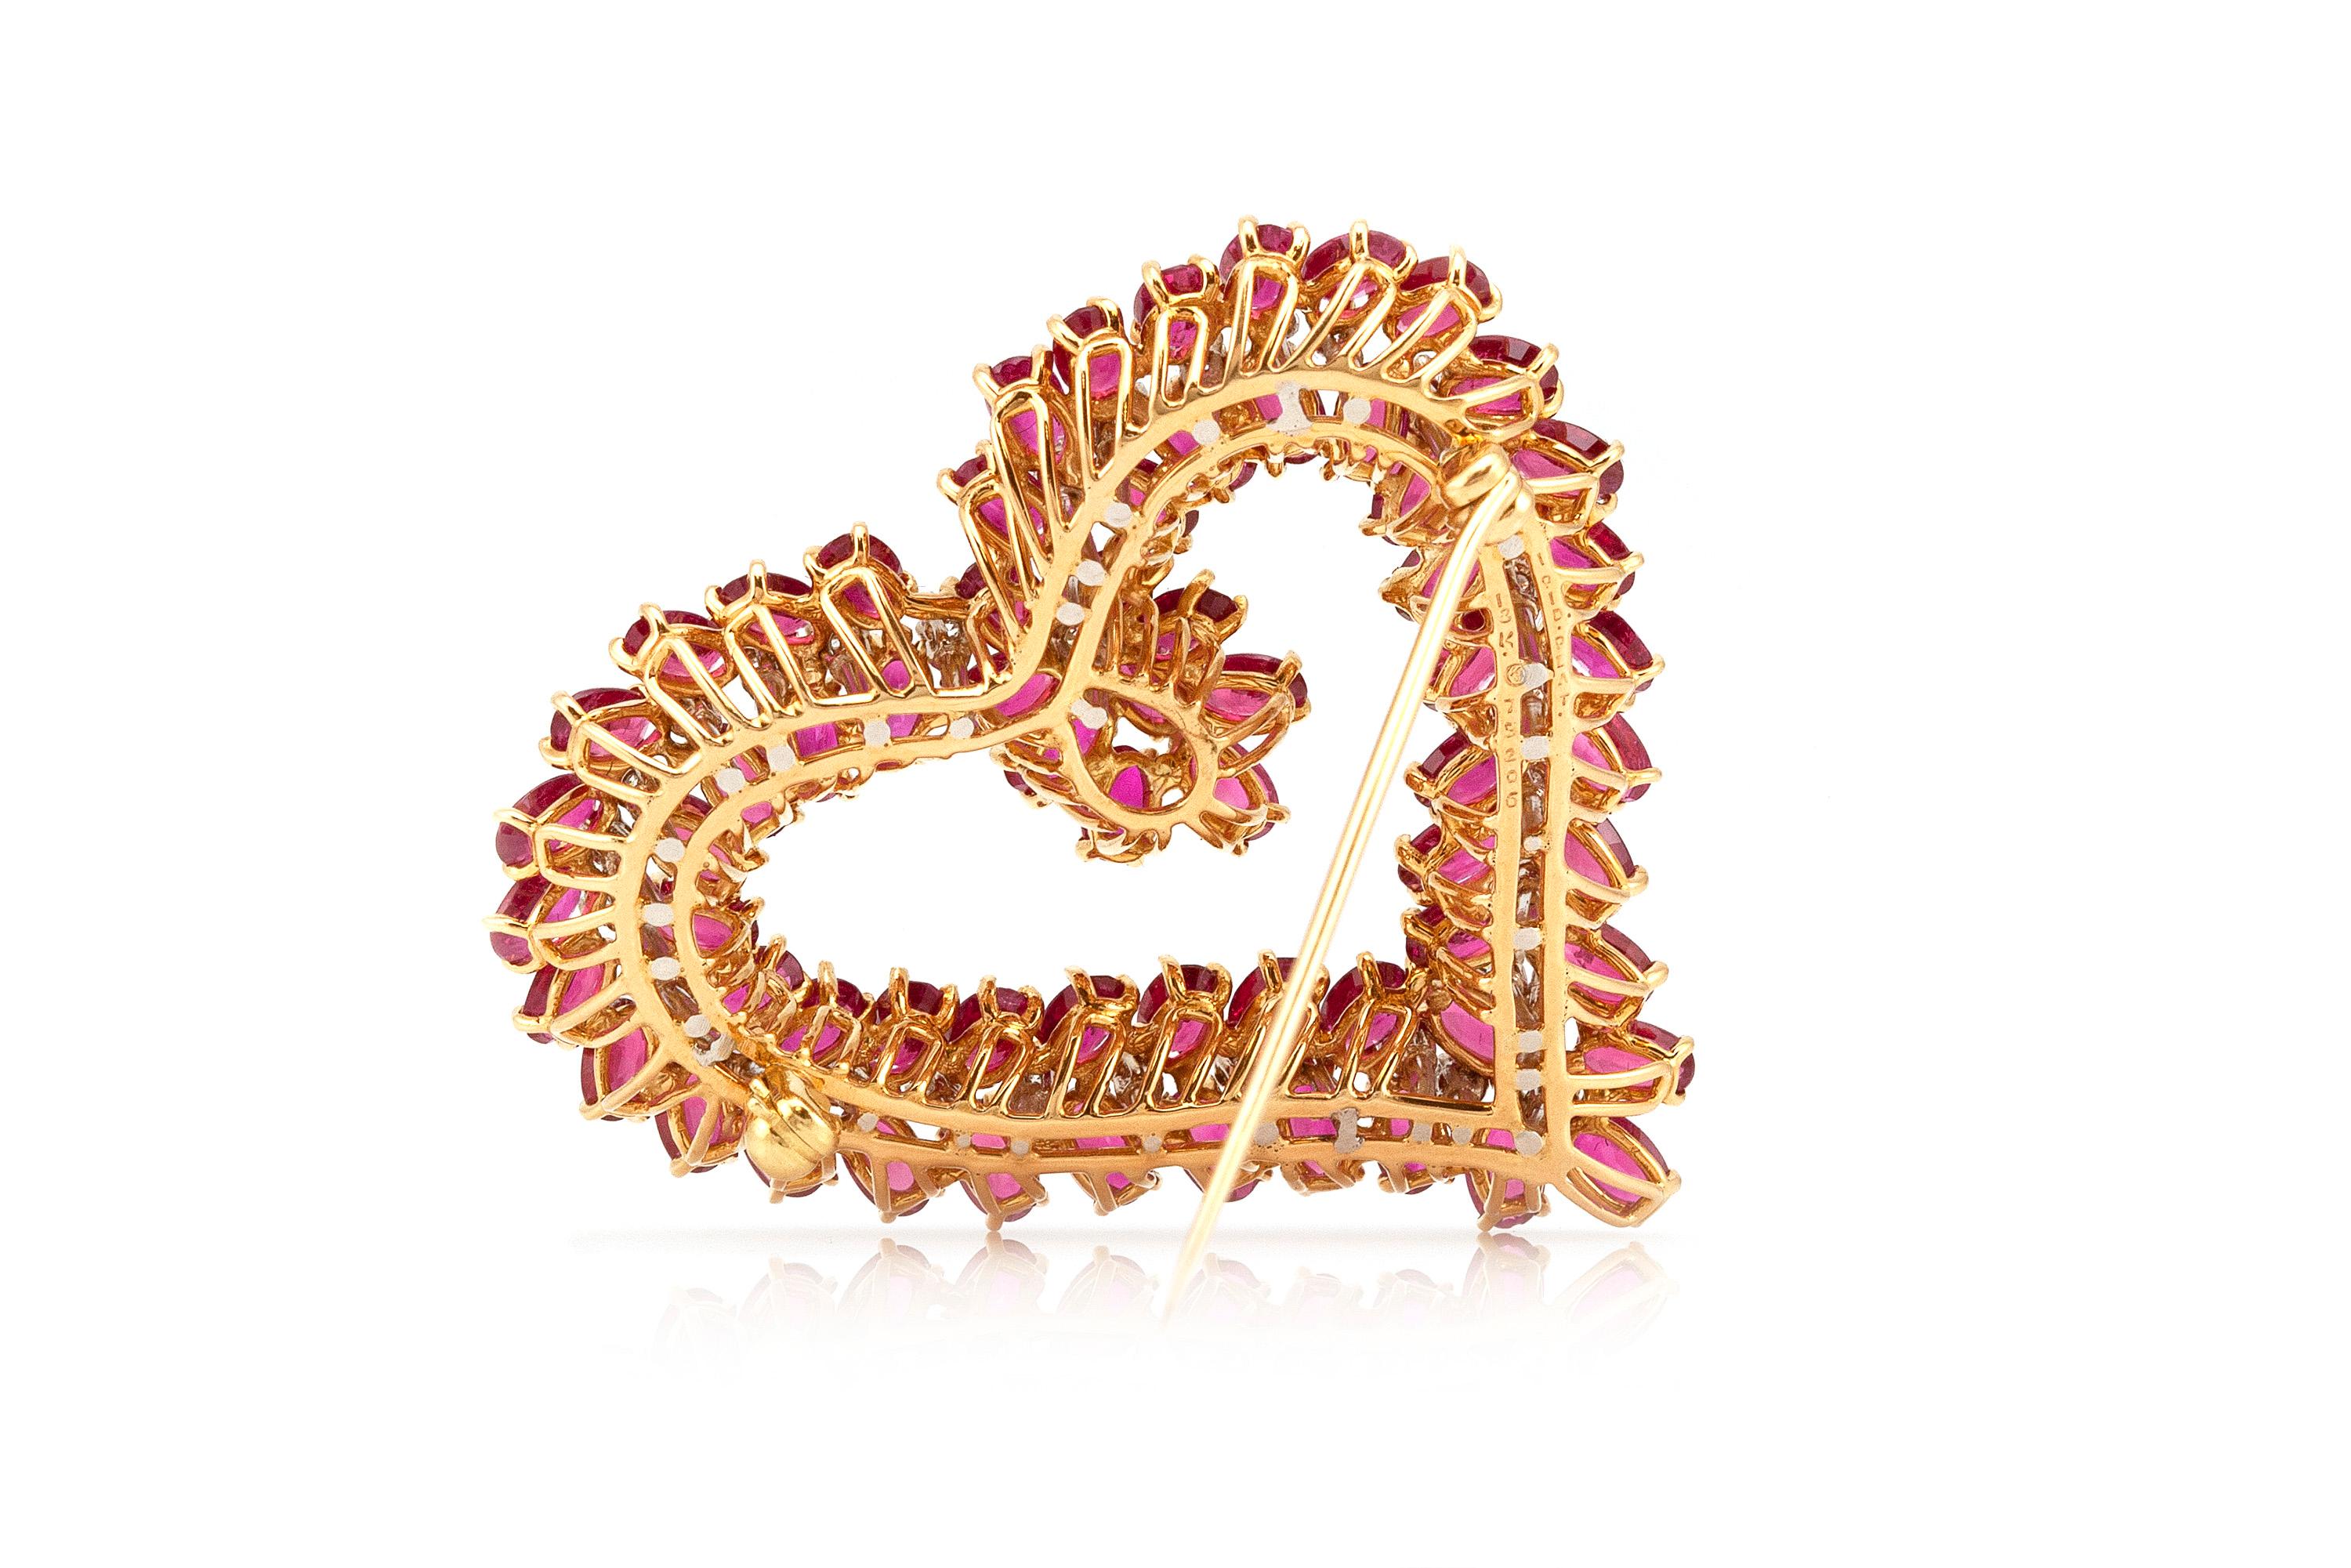 Beautiful Oscar Heyman heart shaped brooch finely crafted in 18K yellow gold and platinum.
The centering line of 35 round diamonds weigh approximately 0.92 ct.
Diamonds color : H-I
Diamonds clarity: VS
The surrounding 66 oval shaped rubies weigh